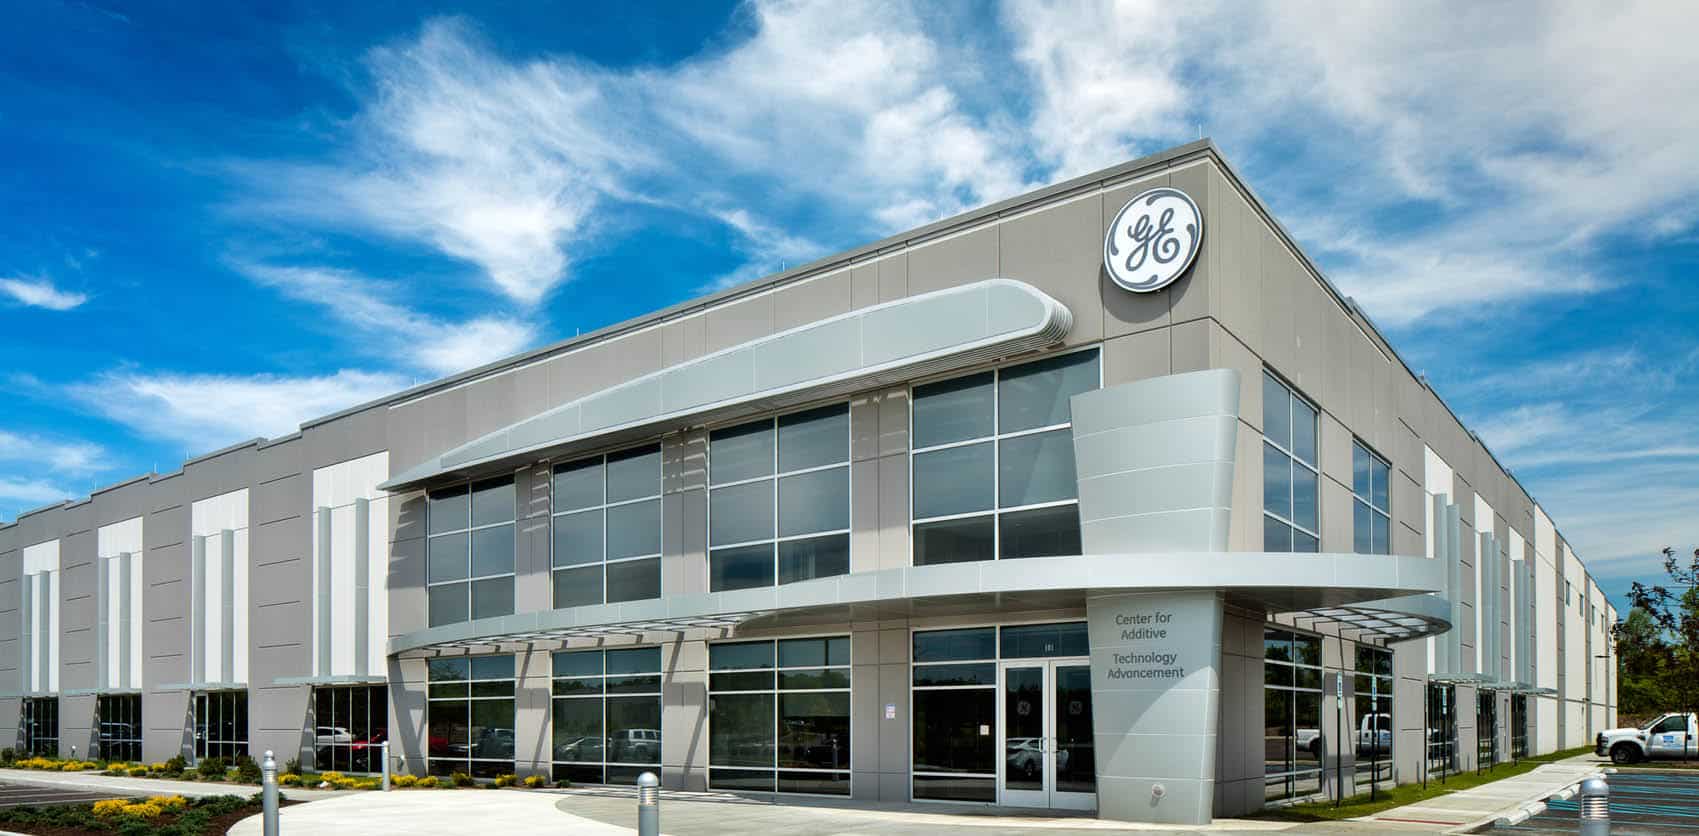 GE Center for Additive Technology